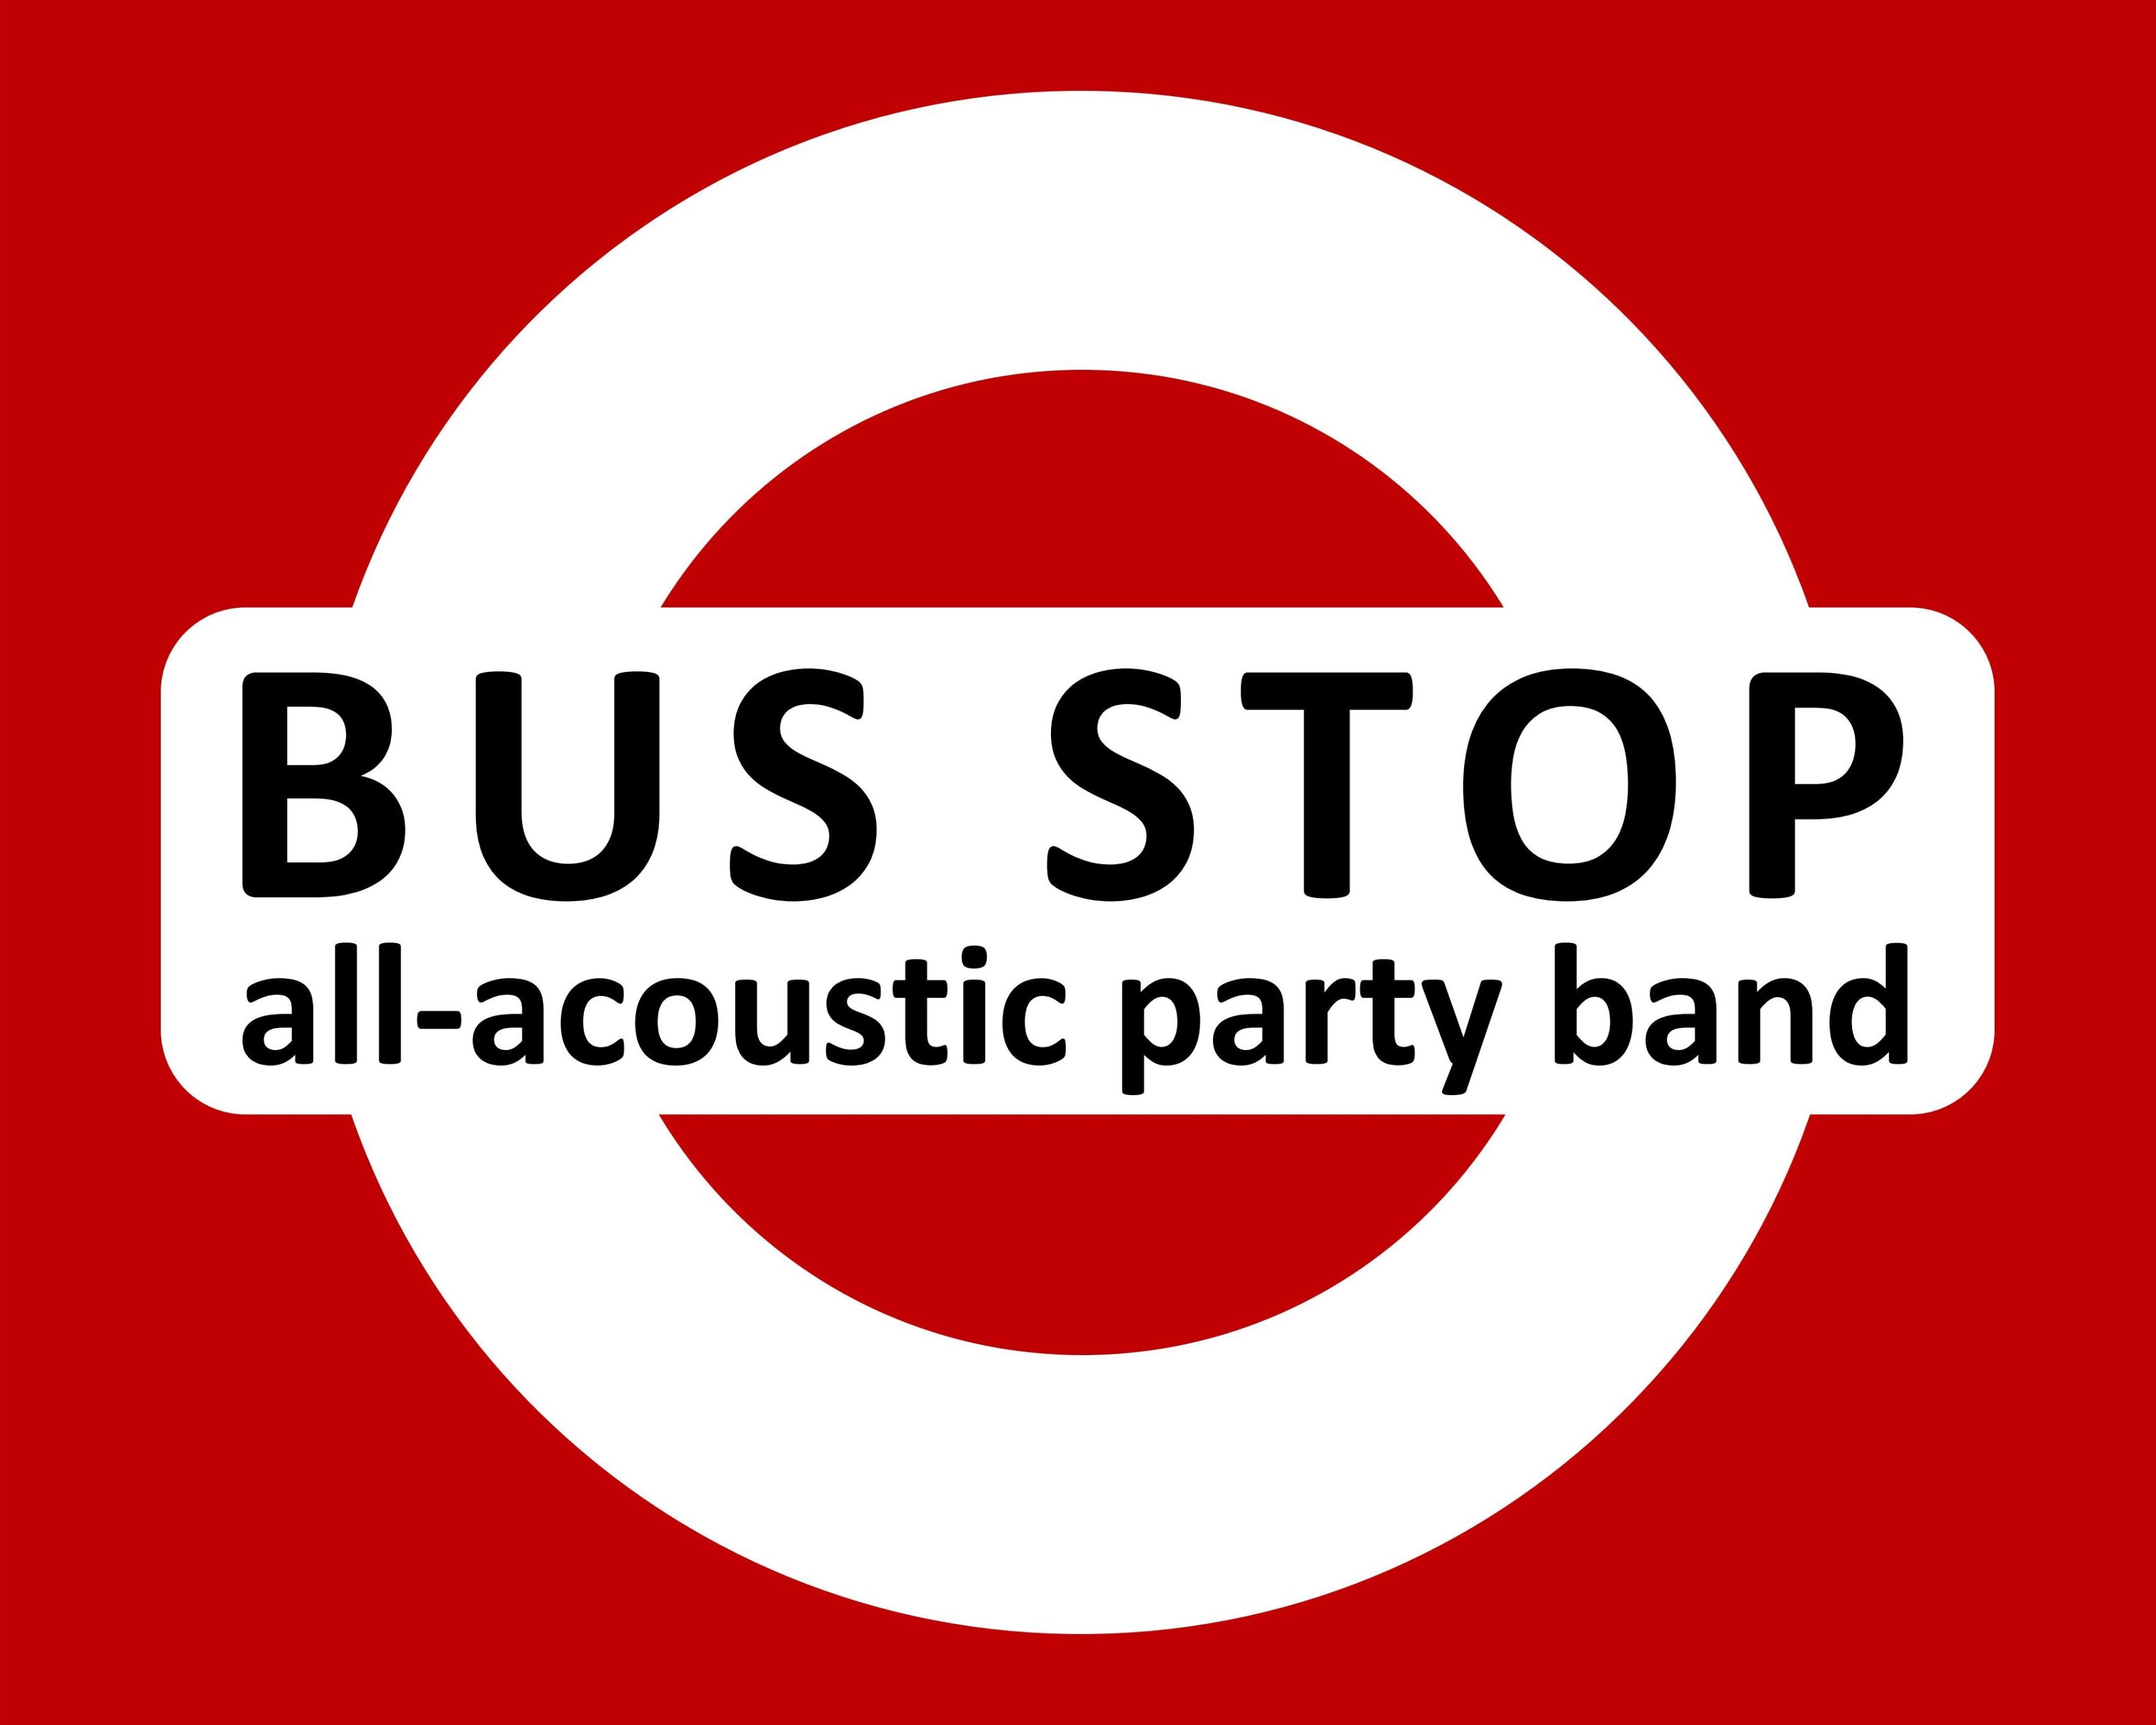 (c) Busstop-band.ch